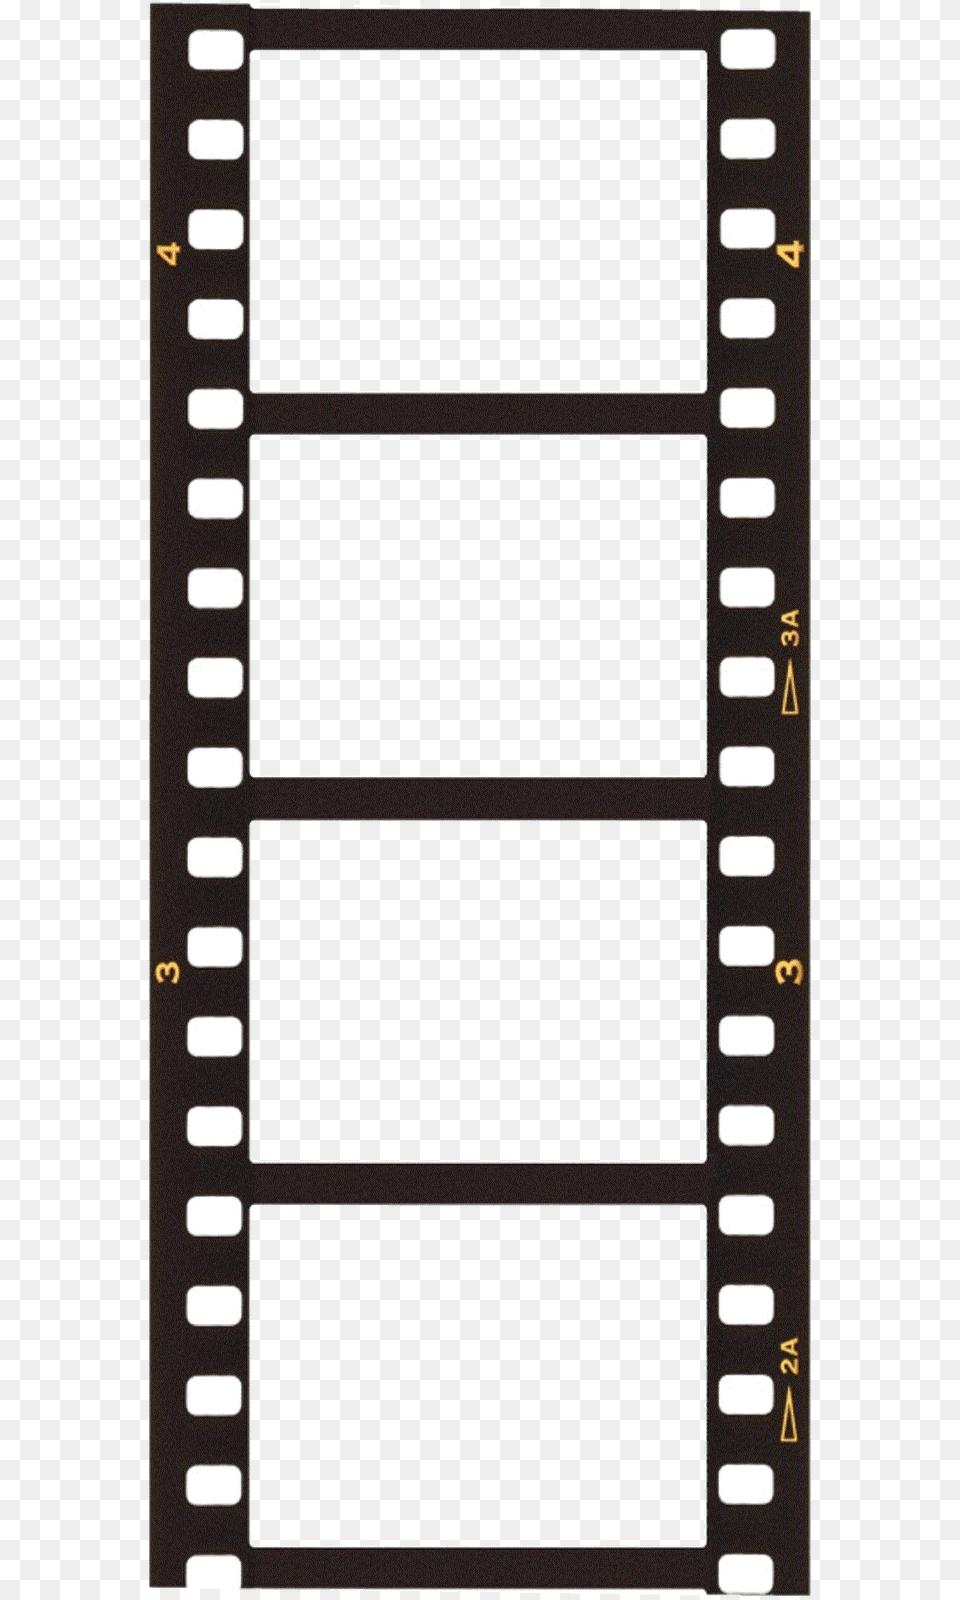 Criteria For Judging A Film, Electronics, Mobile Phone, Phone Png